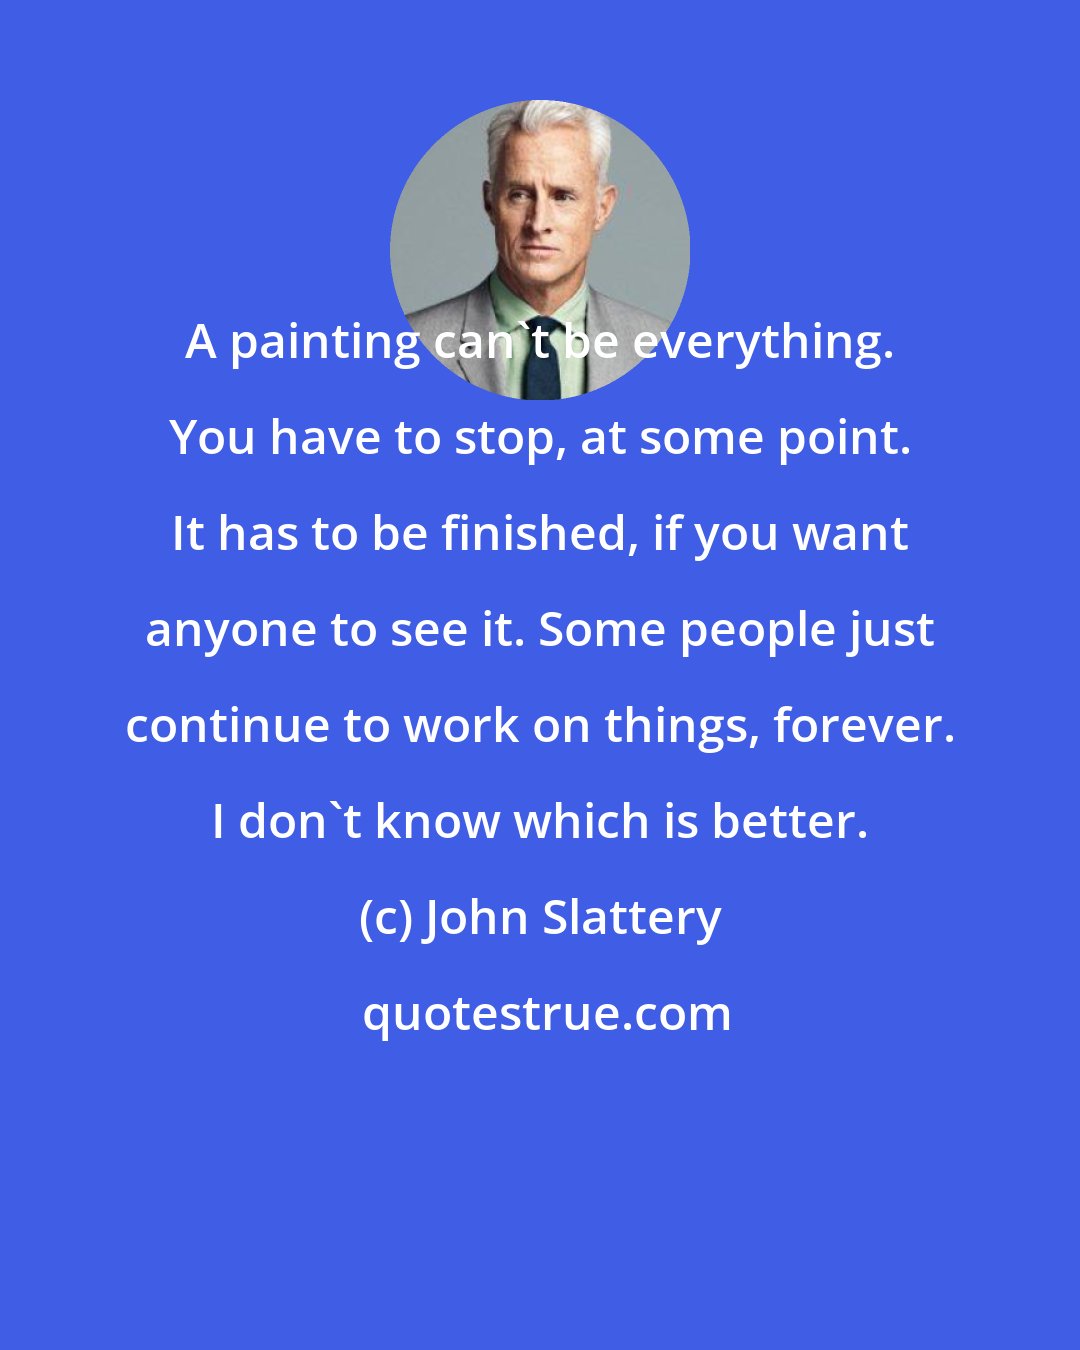 John Slattery: A painting can't be everything. You have to stop, at some point. It has to be finished, if you want anyone to see it. Some people just continue to work on things, forever. I don't know which is better.